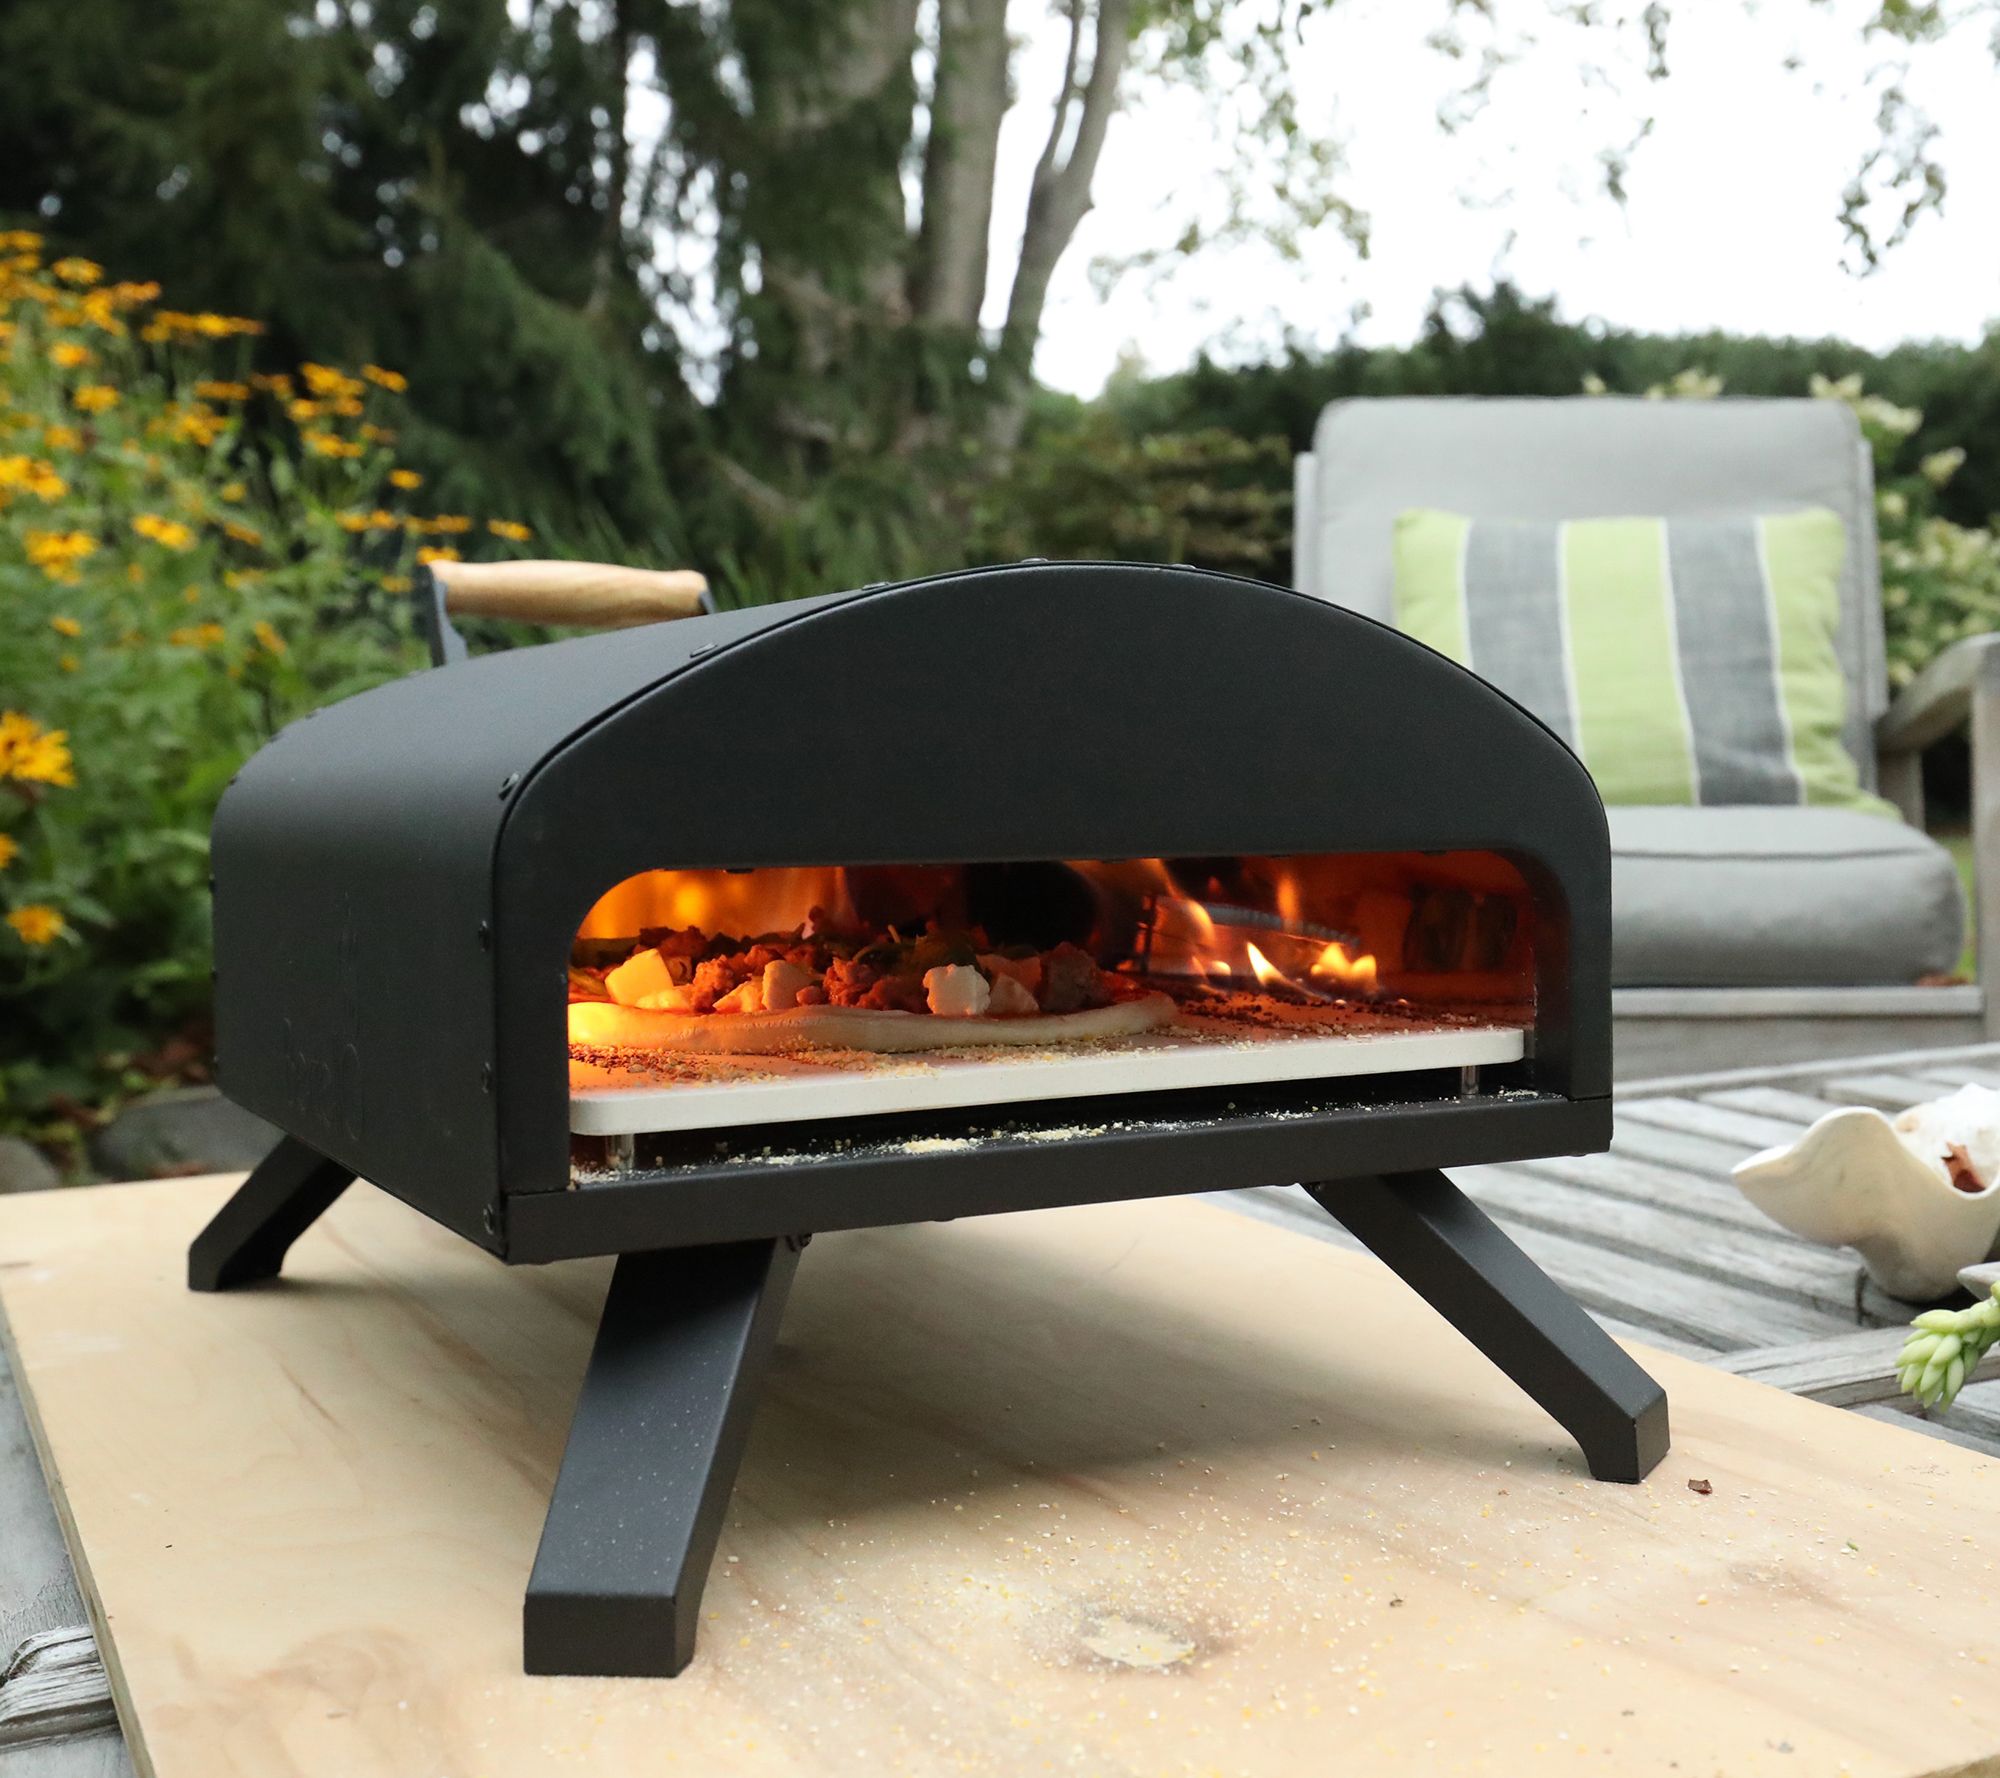 Portable Pellet Pizza Oven Outdoor Wood Fired Pizza Ovens Included Pizza  Stone, Fold-up Legs, Cover